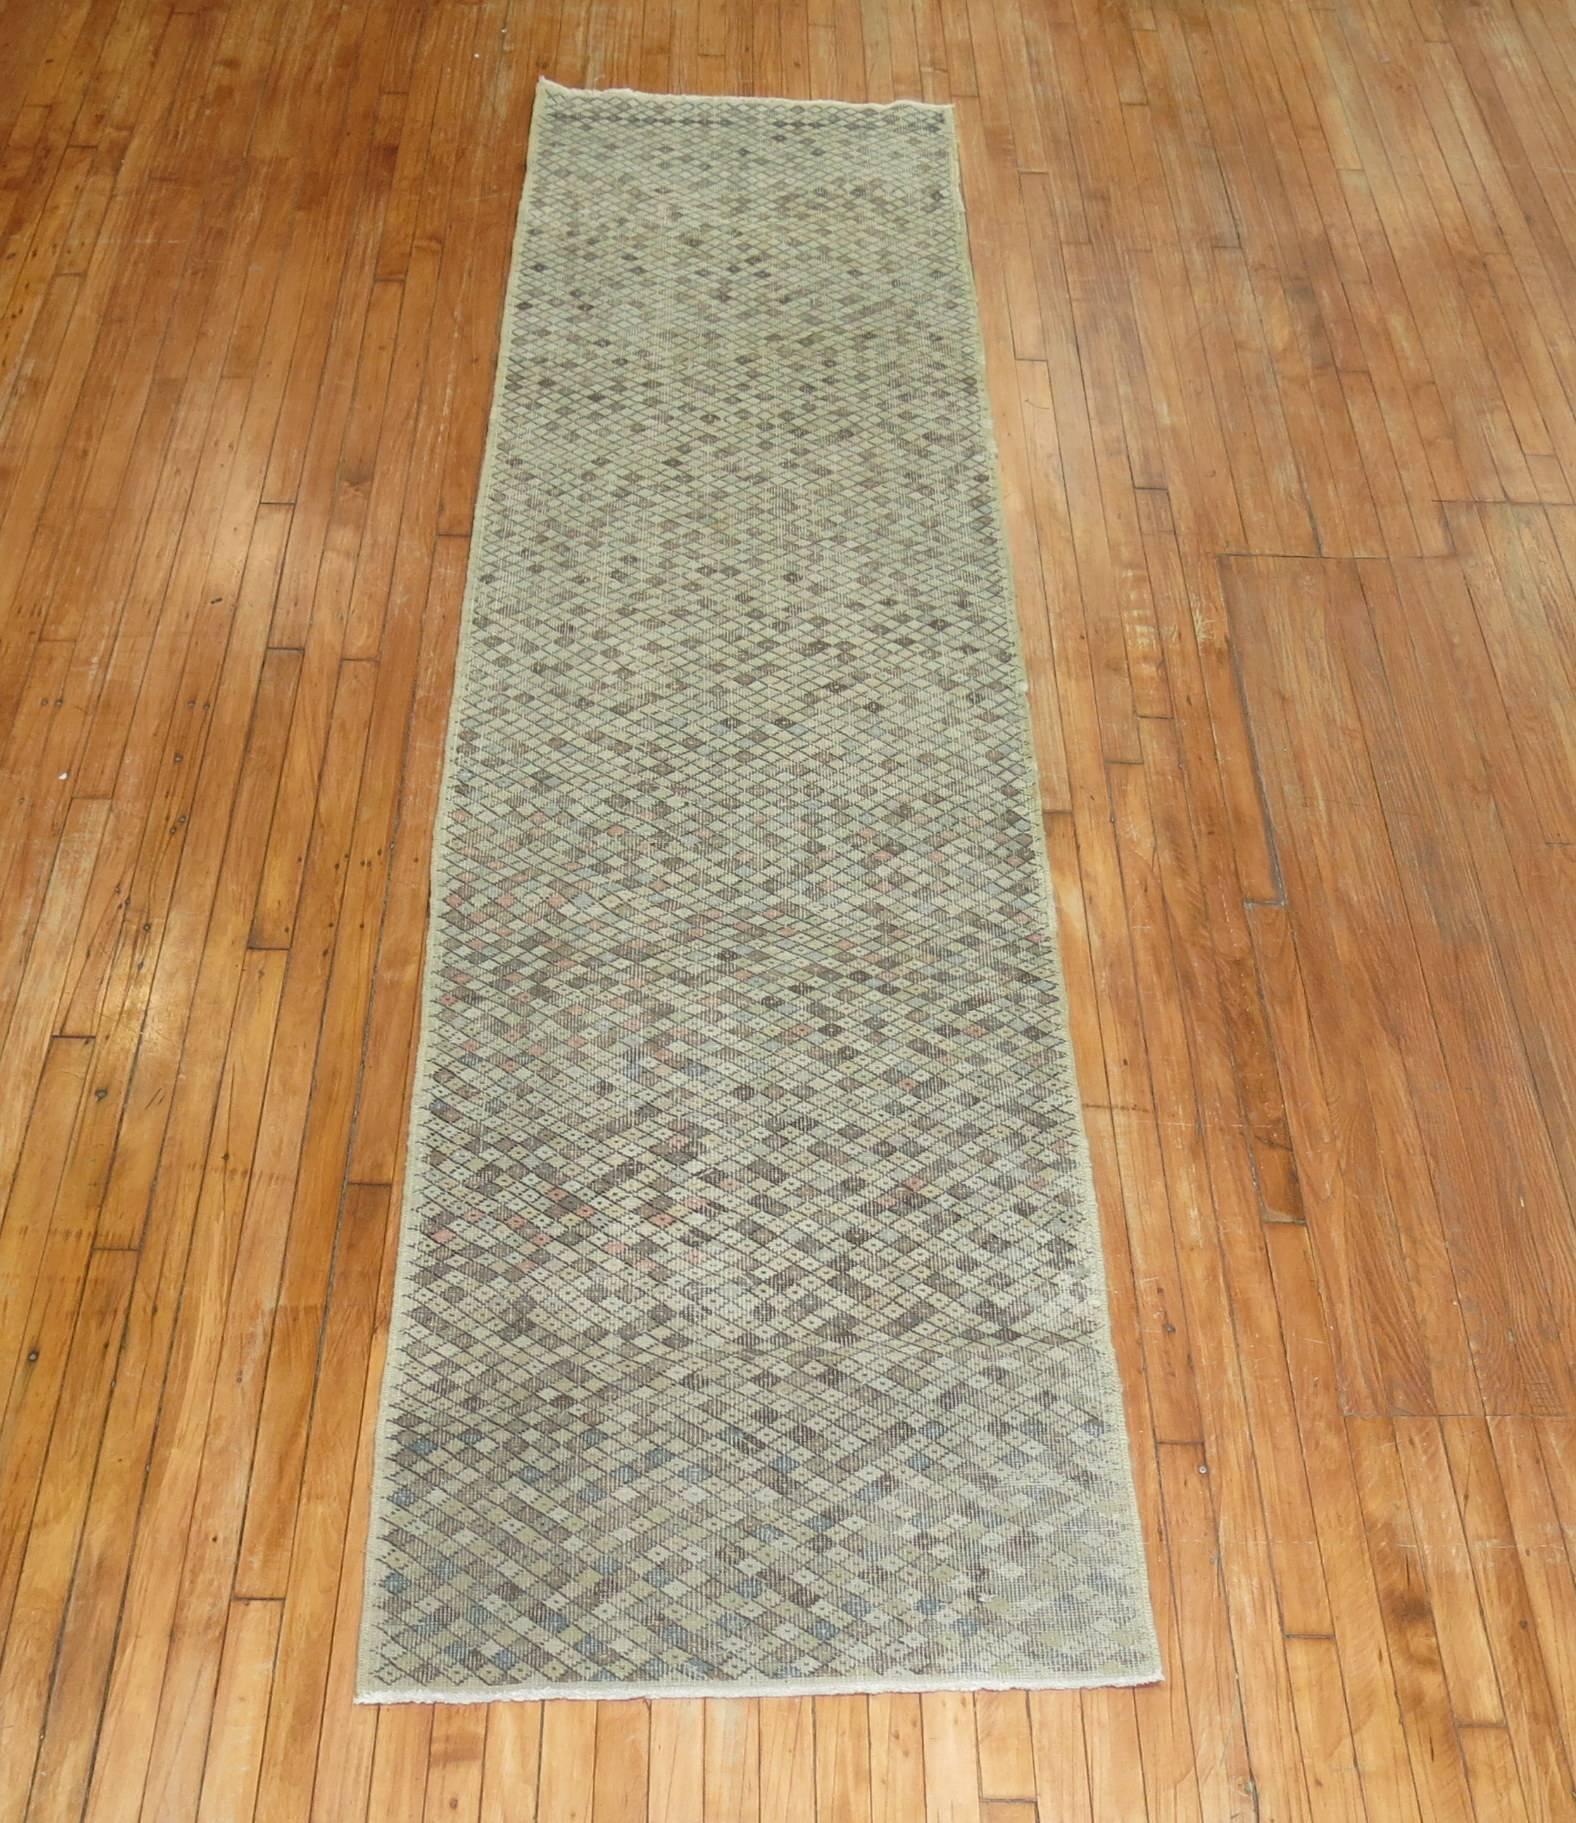 Neutral Color Turkish Runner with an all-over mini-diamond motif throughout in earth tones

2'10'' x 10'10''